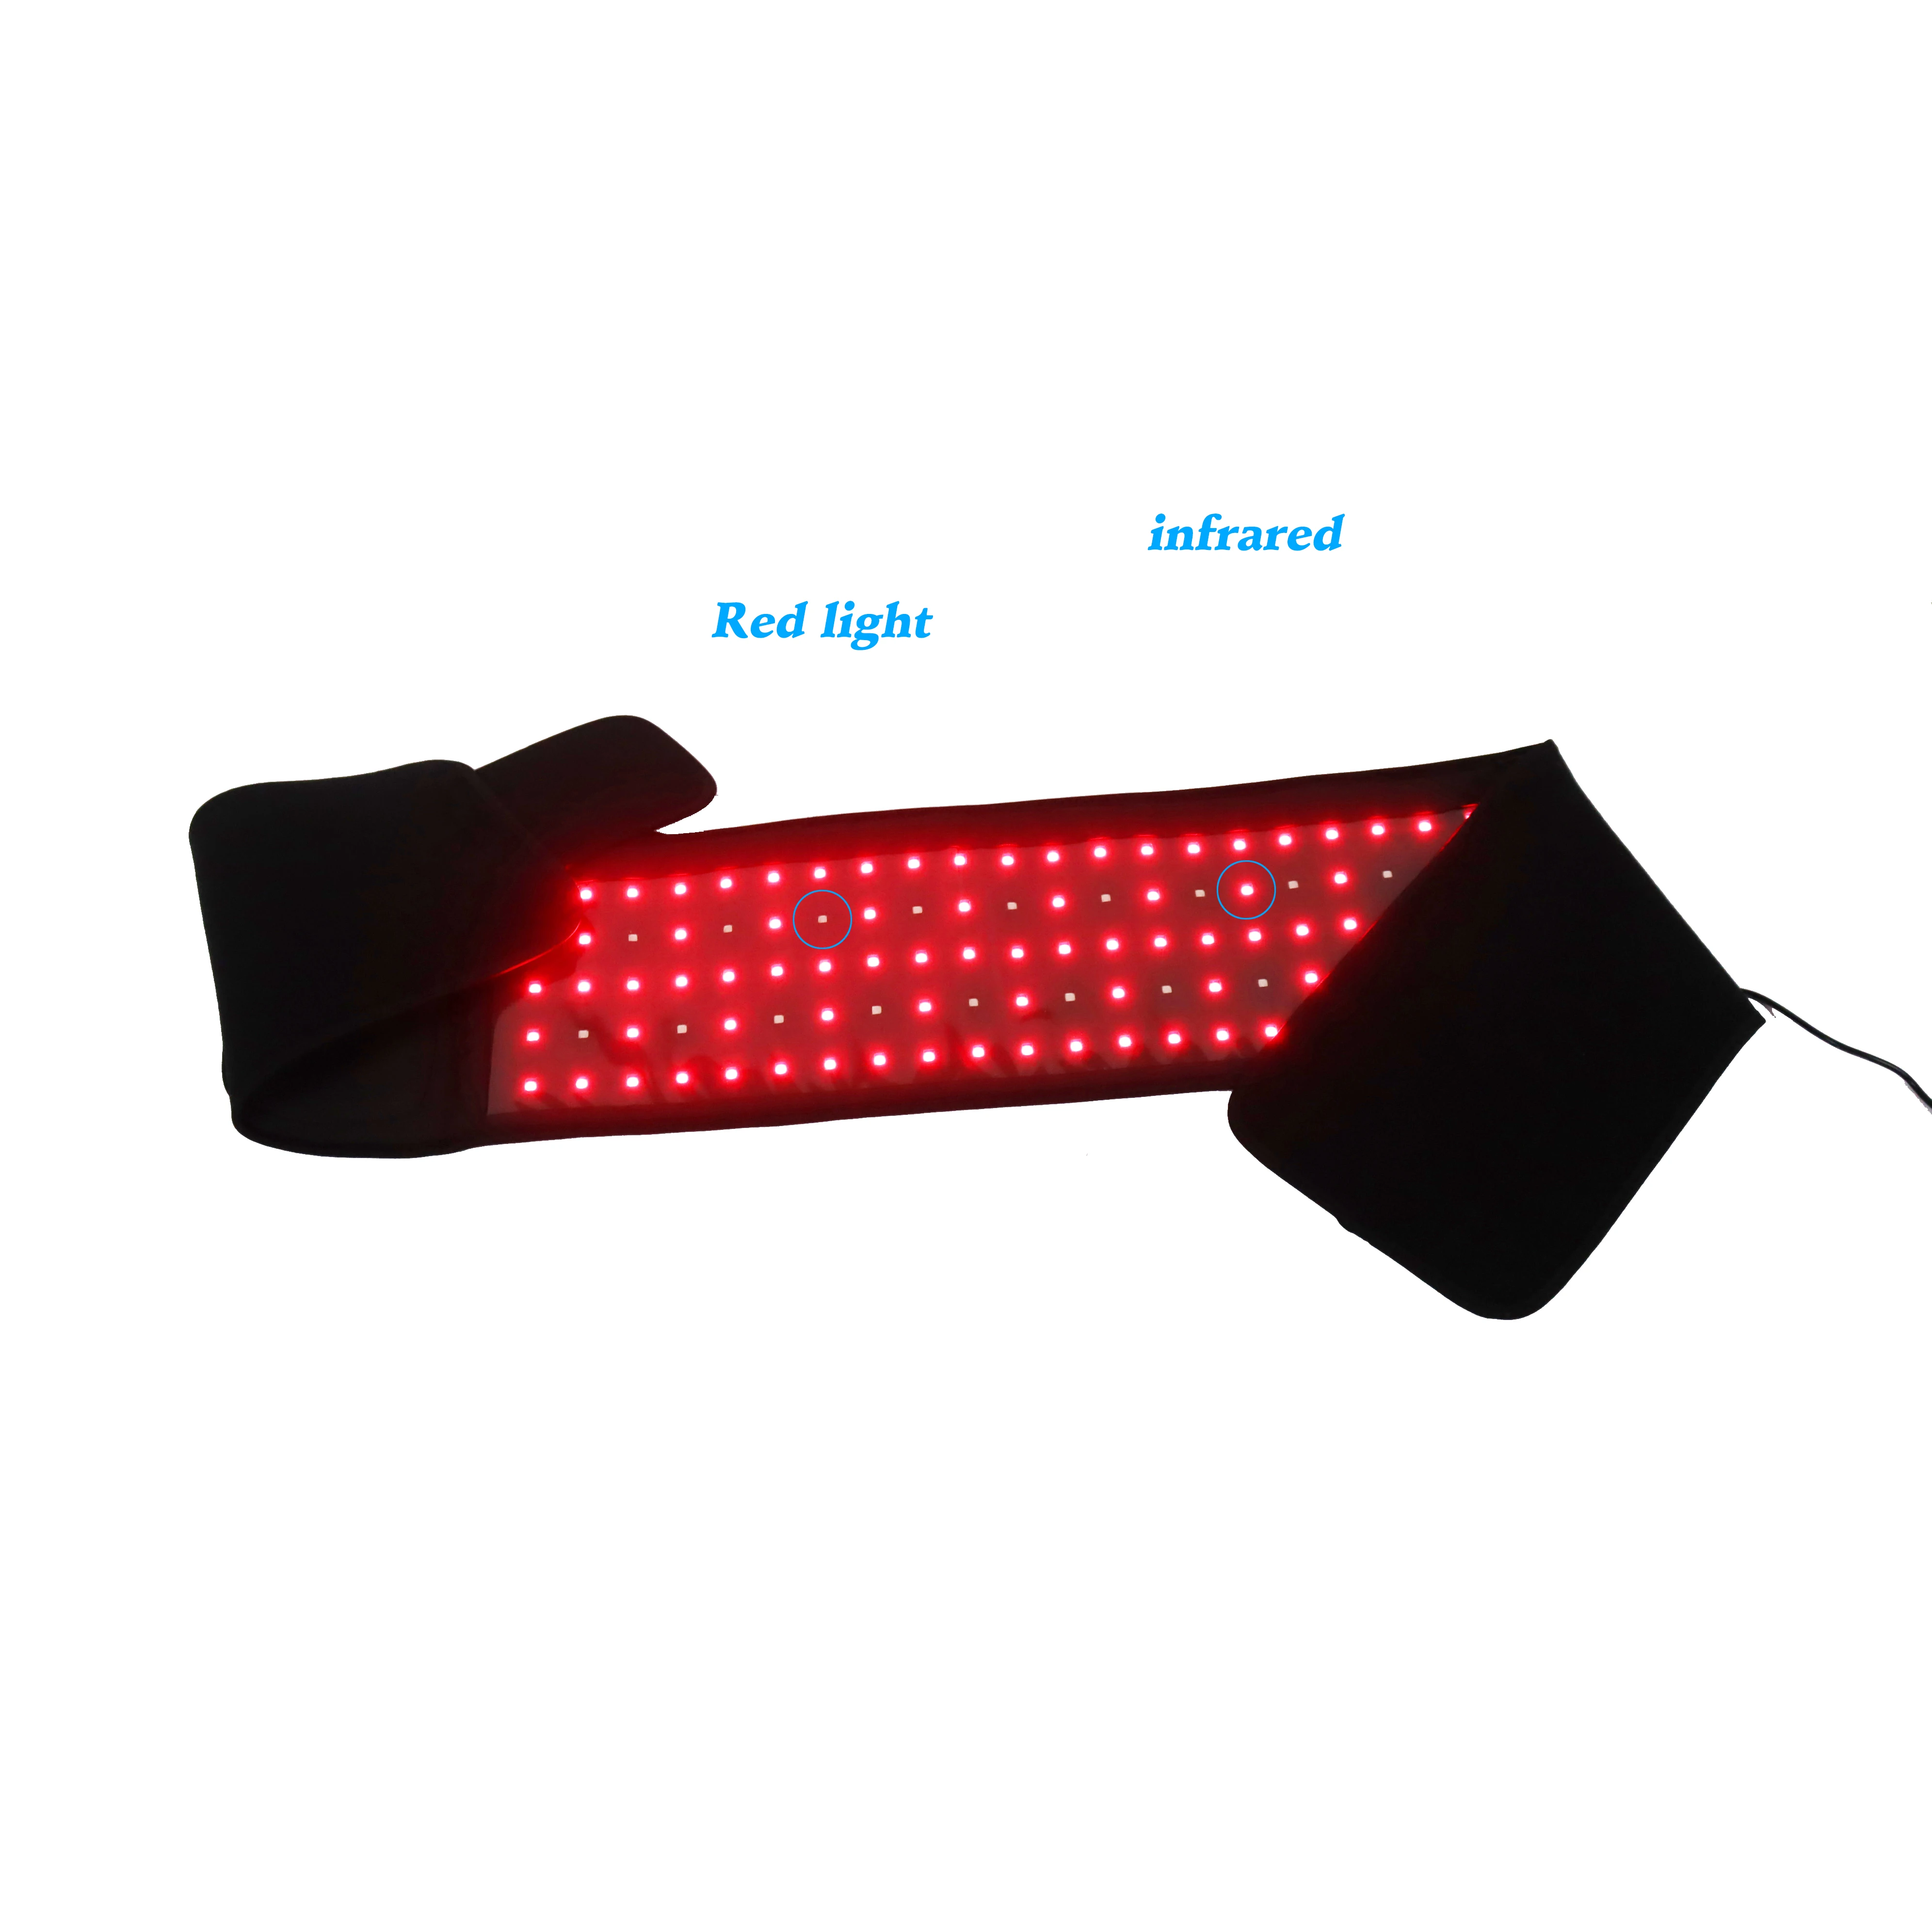 

The LED red light infrared treatment belt relieves waist pain, promotes blood circulation You and your customers deserve it, Black